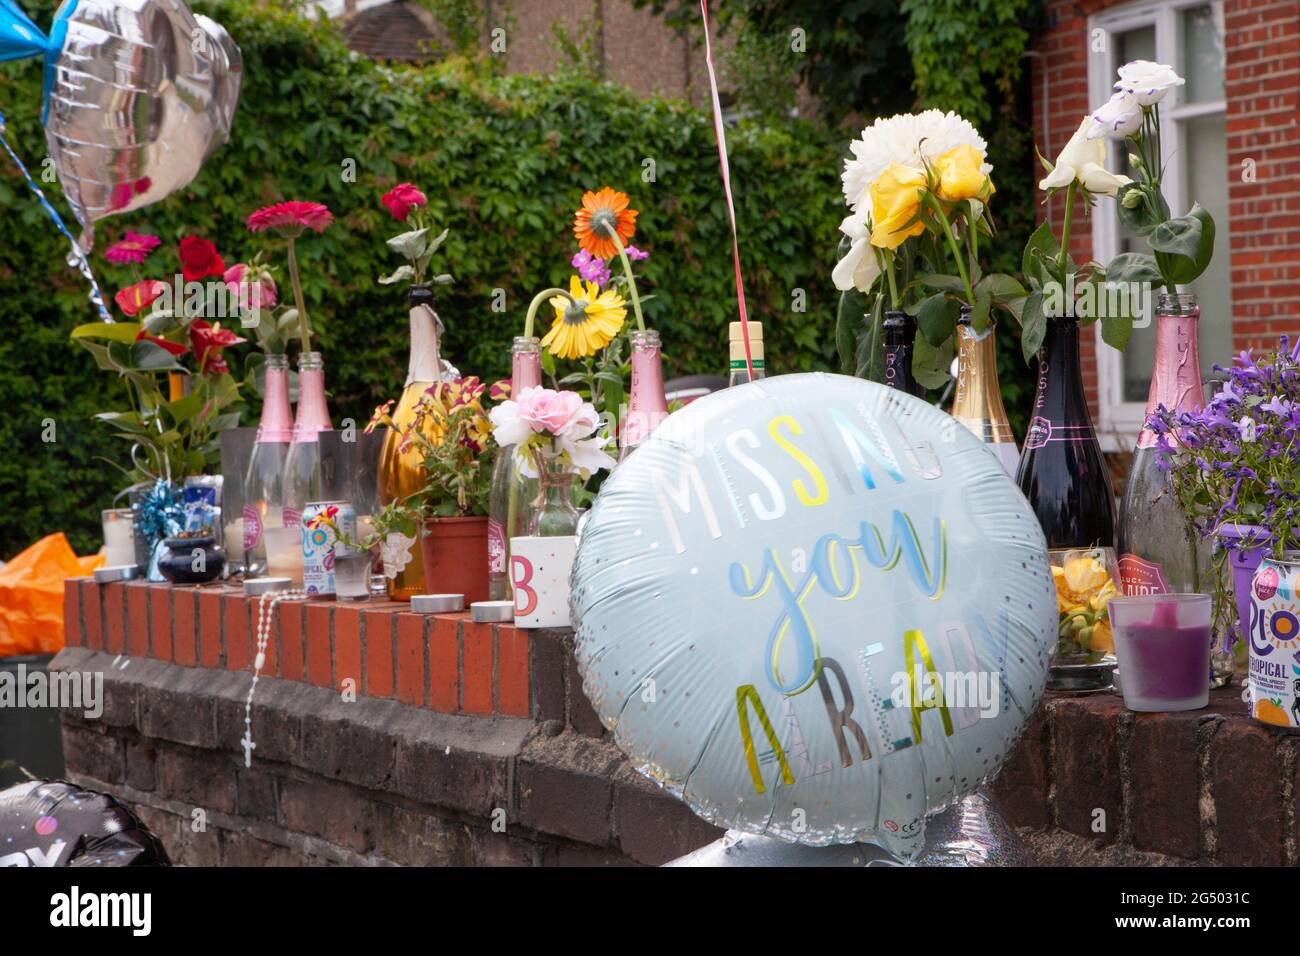 London, UK, 24 June 2021: Tributes line a wall on Bedford Hill in Balham where Mattias Poleon, 27, was shot dead outside his home on 17 June 2021. Tributes include flowers, candles, framed photos, bottles of alcohol and Father's Day balloons. Anna Watson/Alamy Live News. Stock Photo